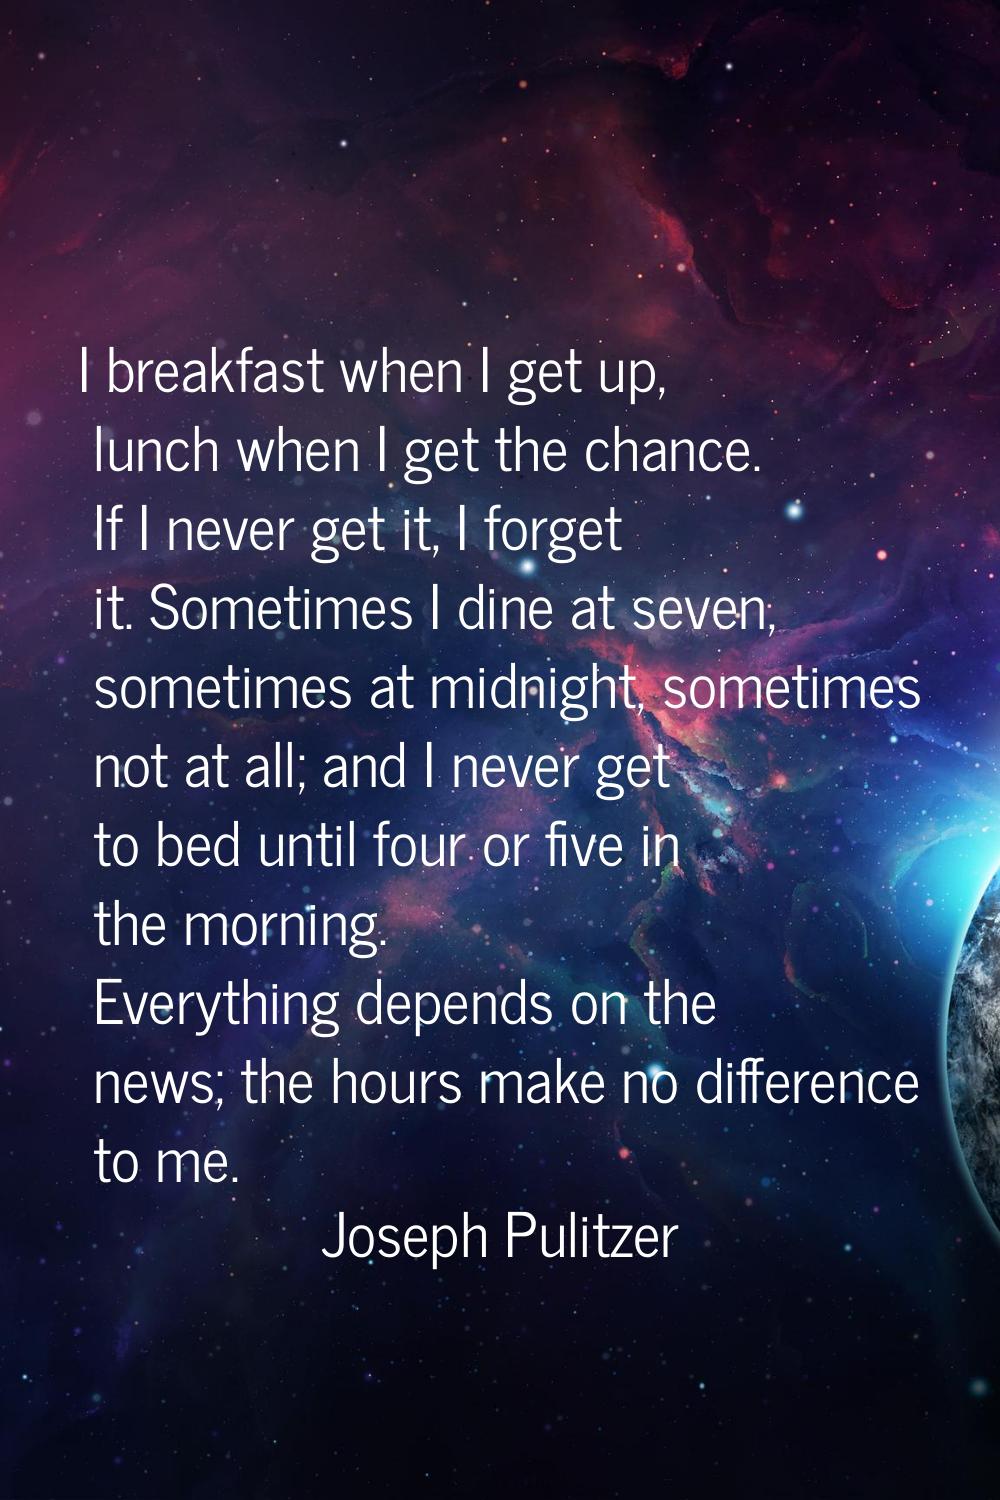 I breakfast when I get up, lunch when I get the chance. If I never get it, I forget it. Sometimes I